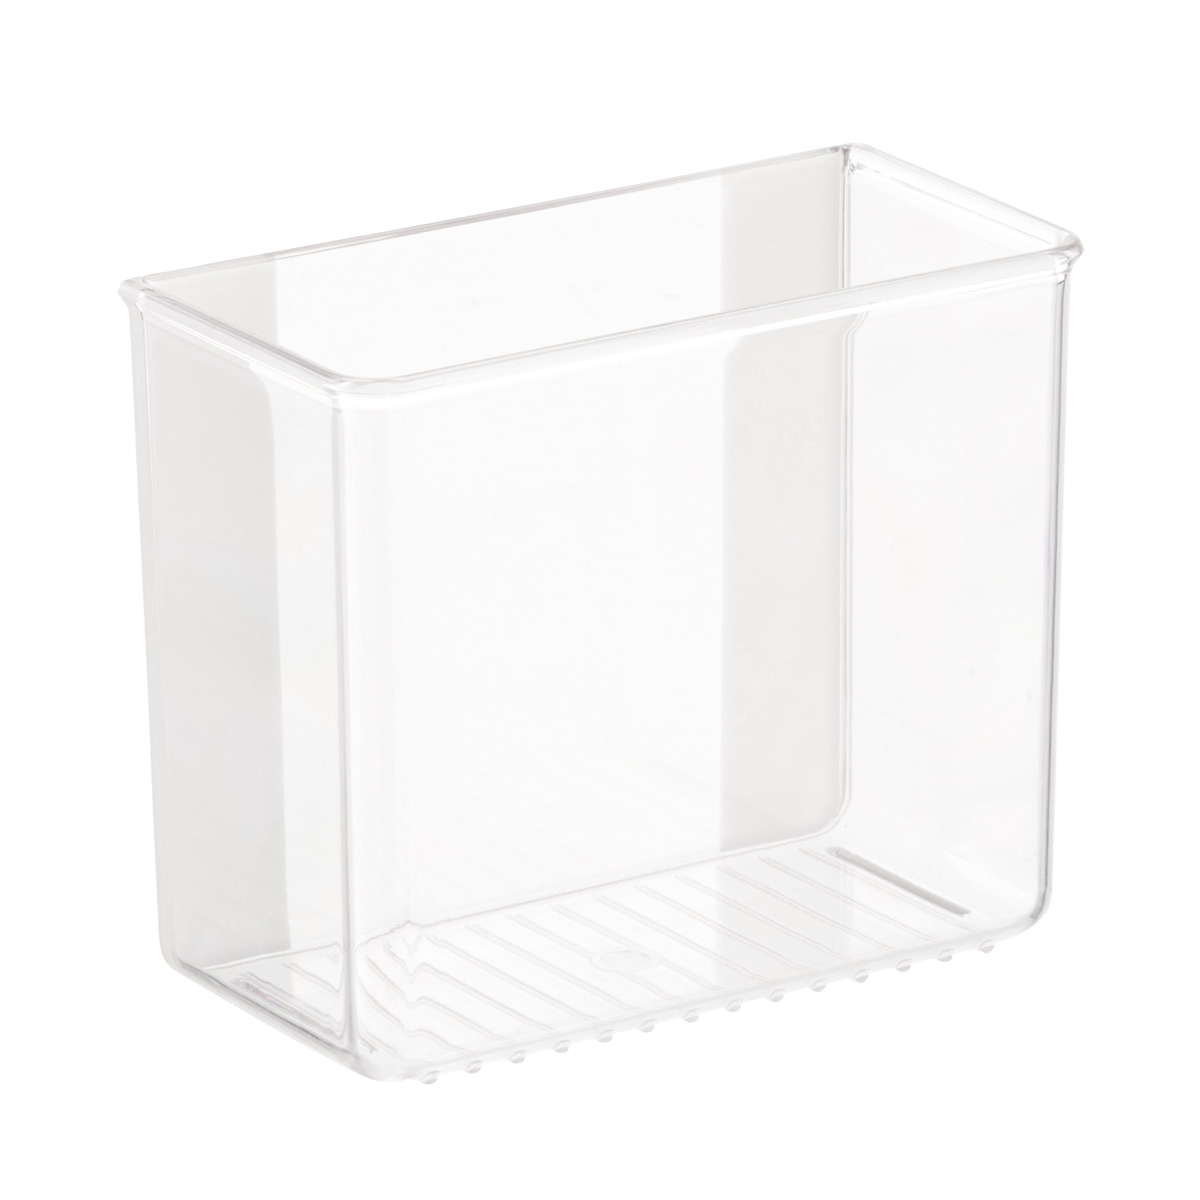 https://www.containerstore.com/catalogimages/314958/10071398-affixx-adhesive-organizer-b.jpg